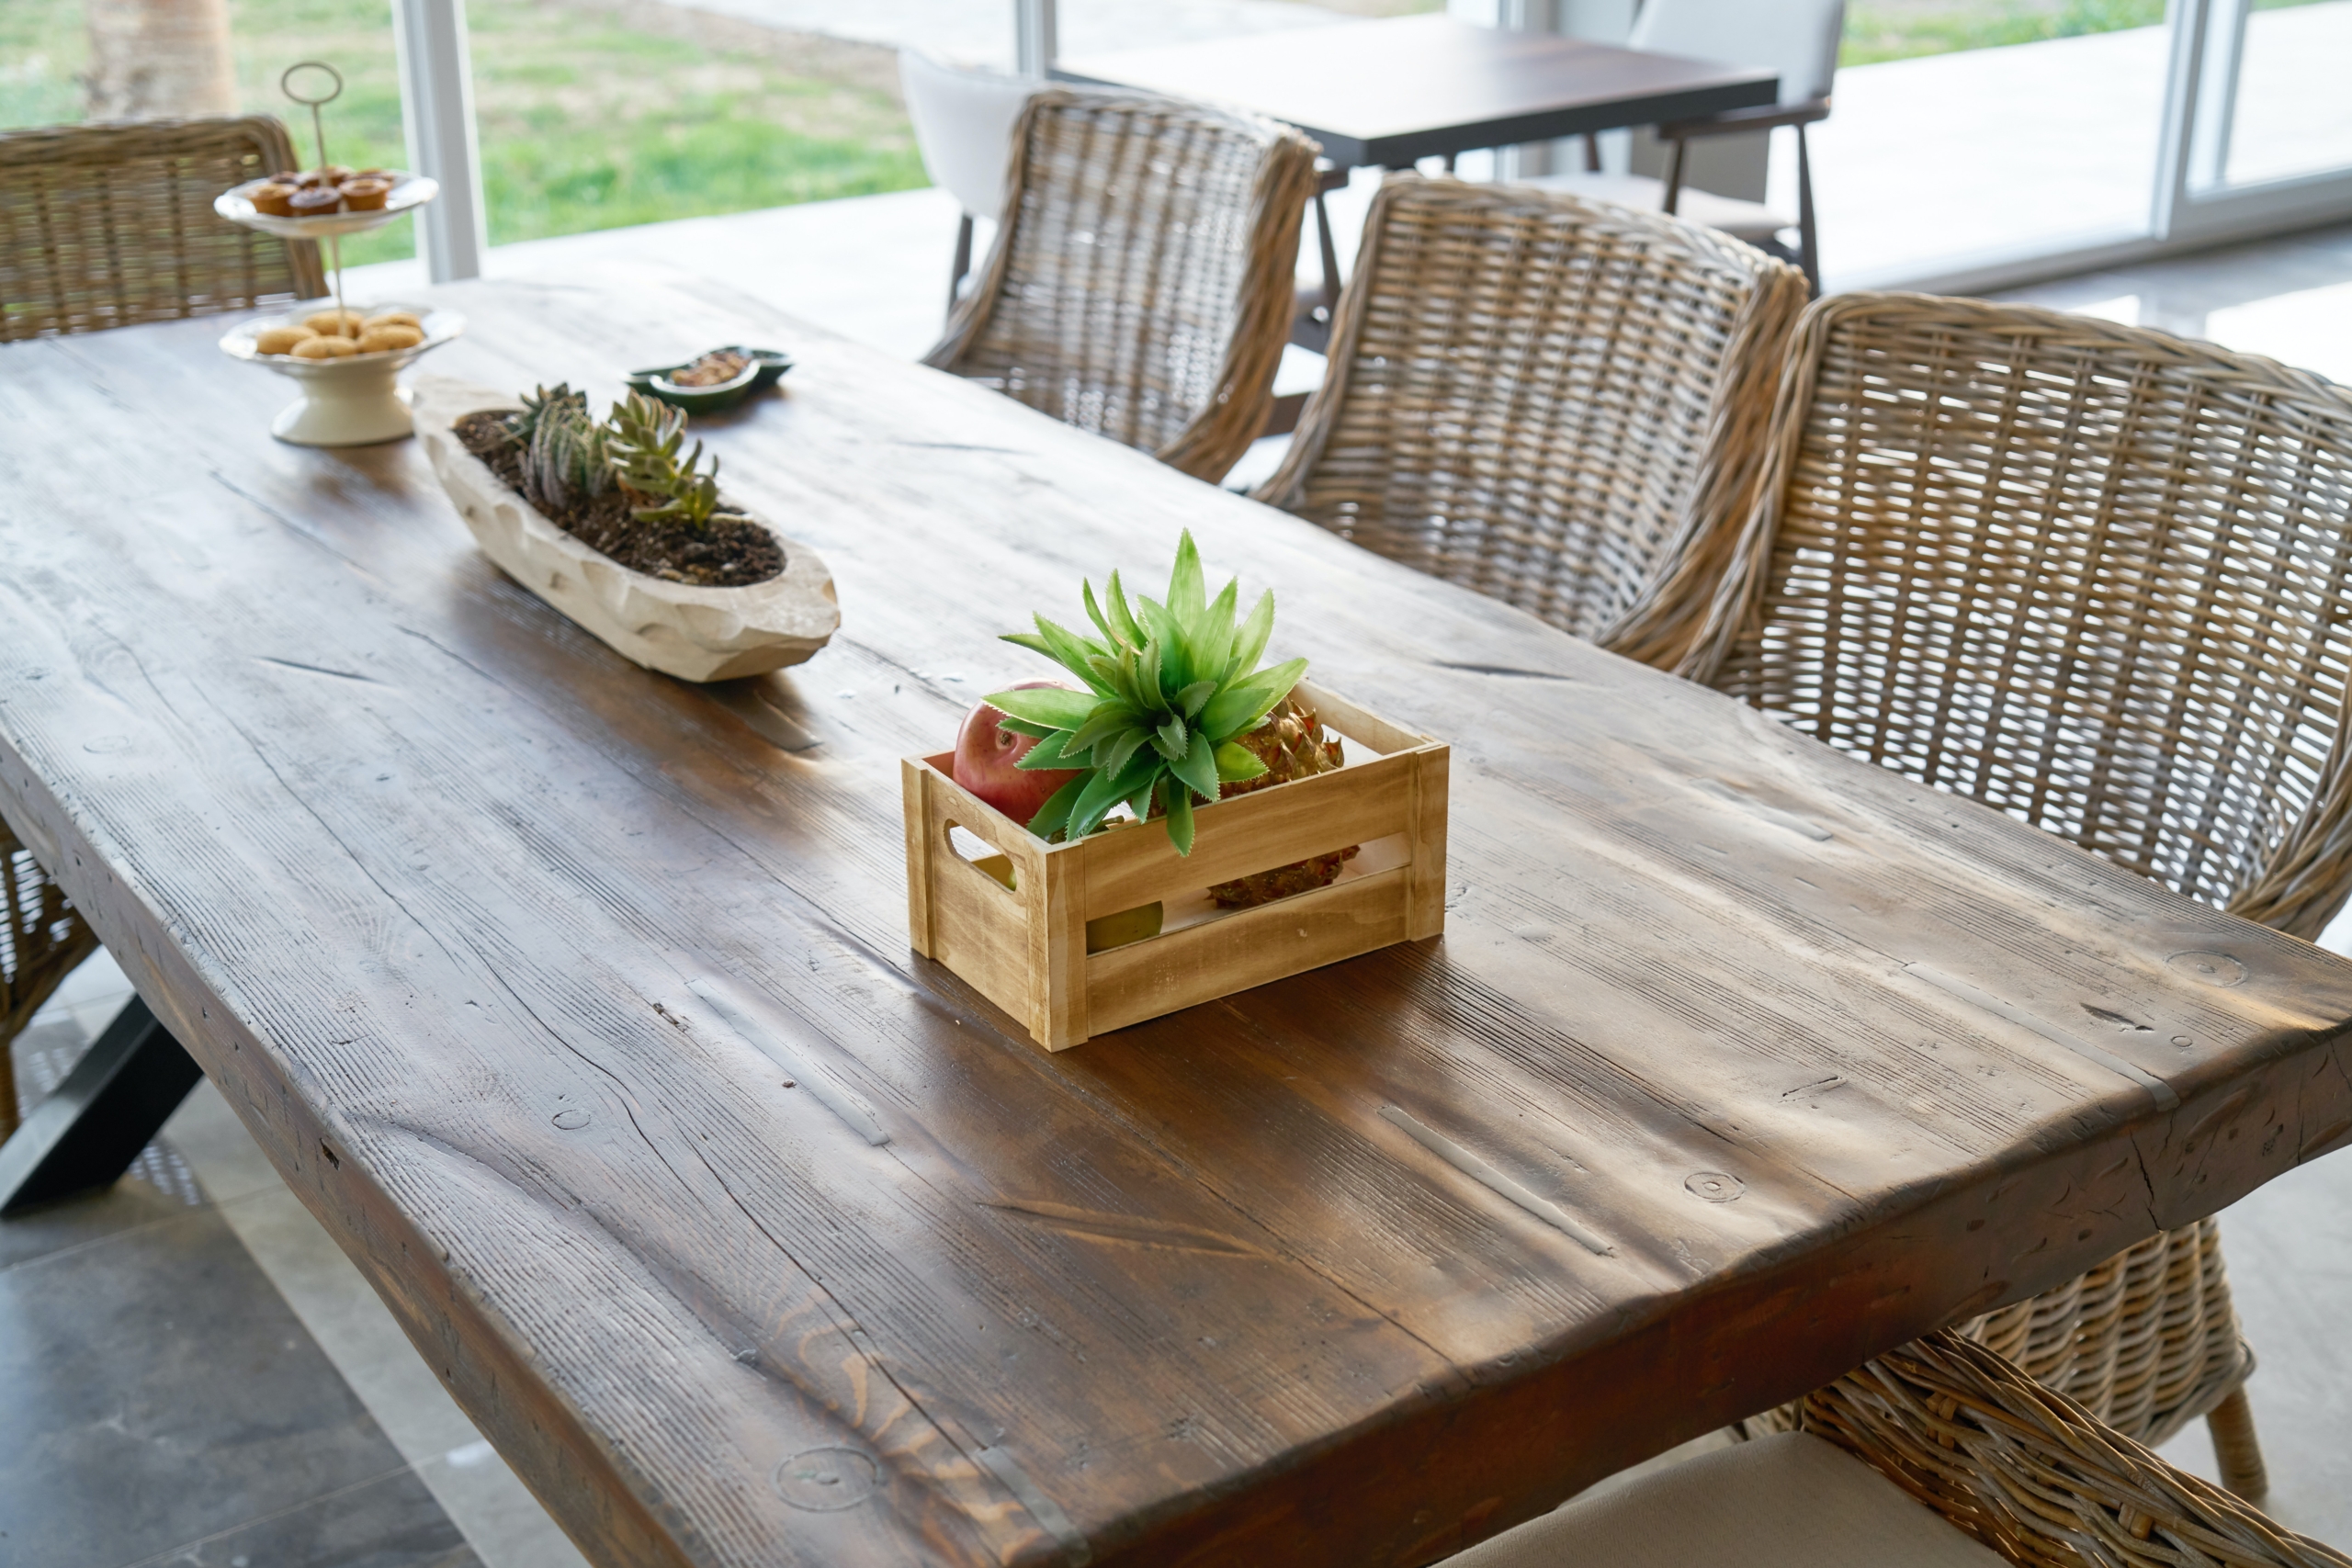 Wood dining table with various centerpieces.